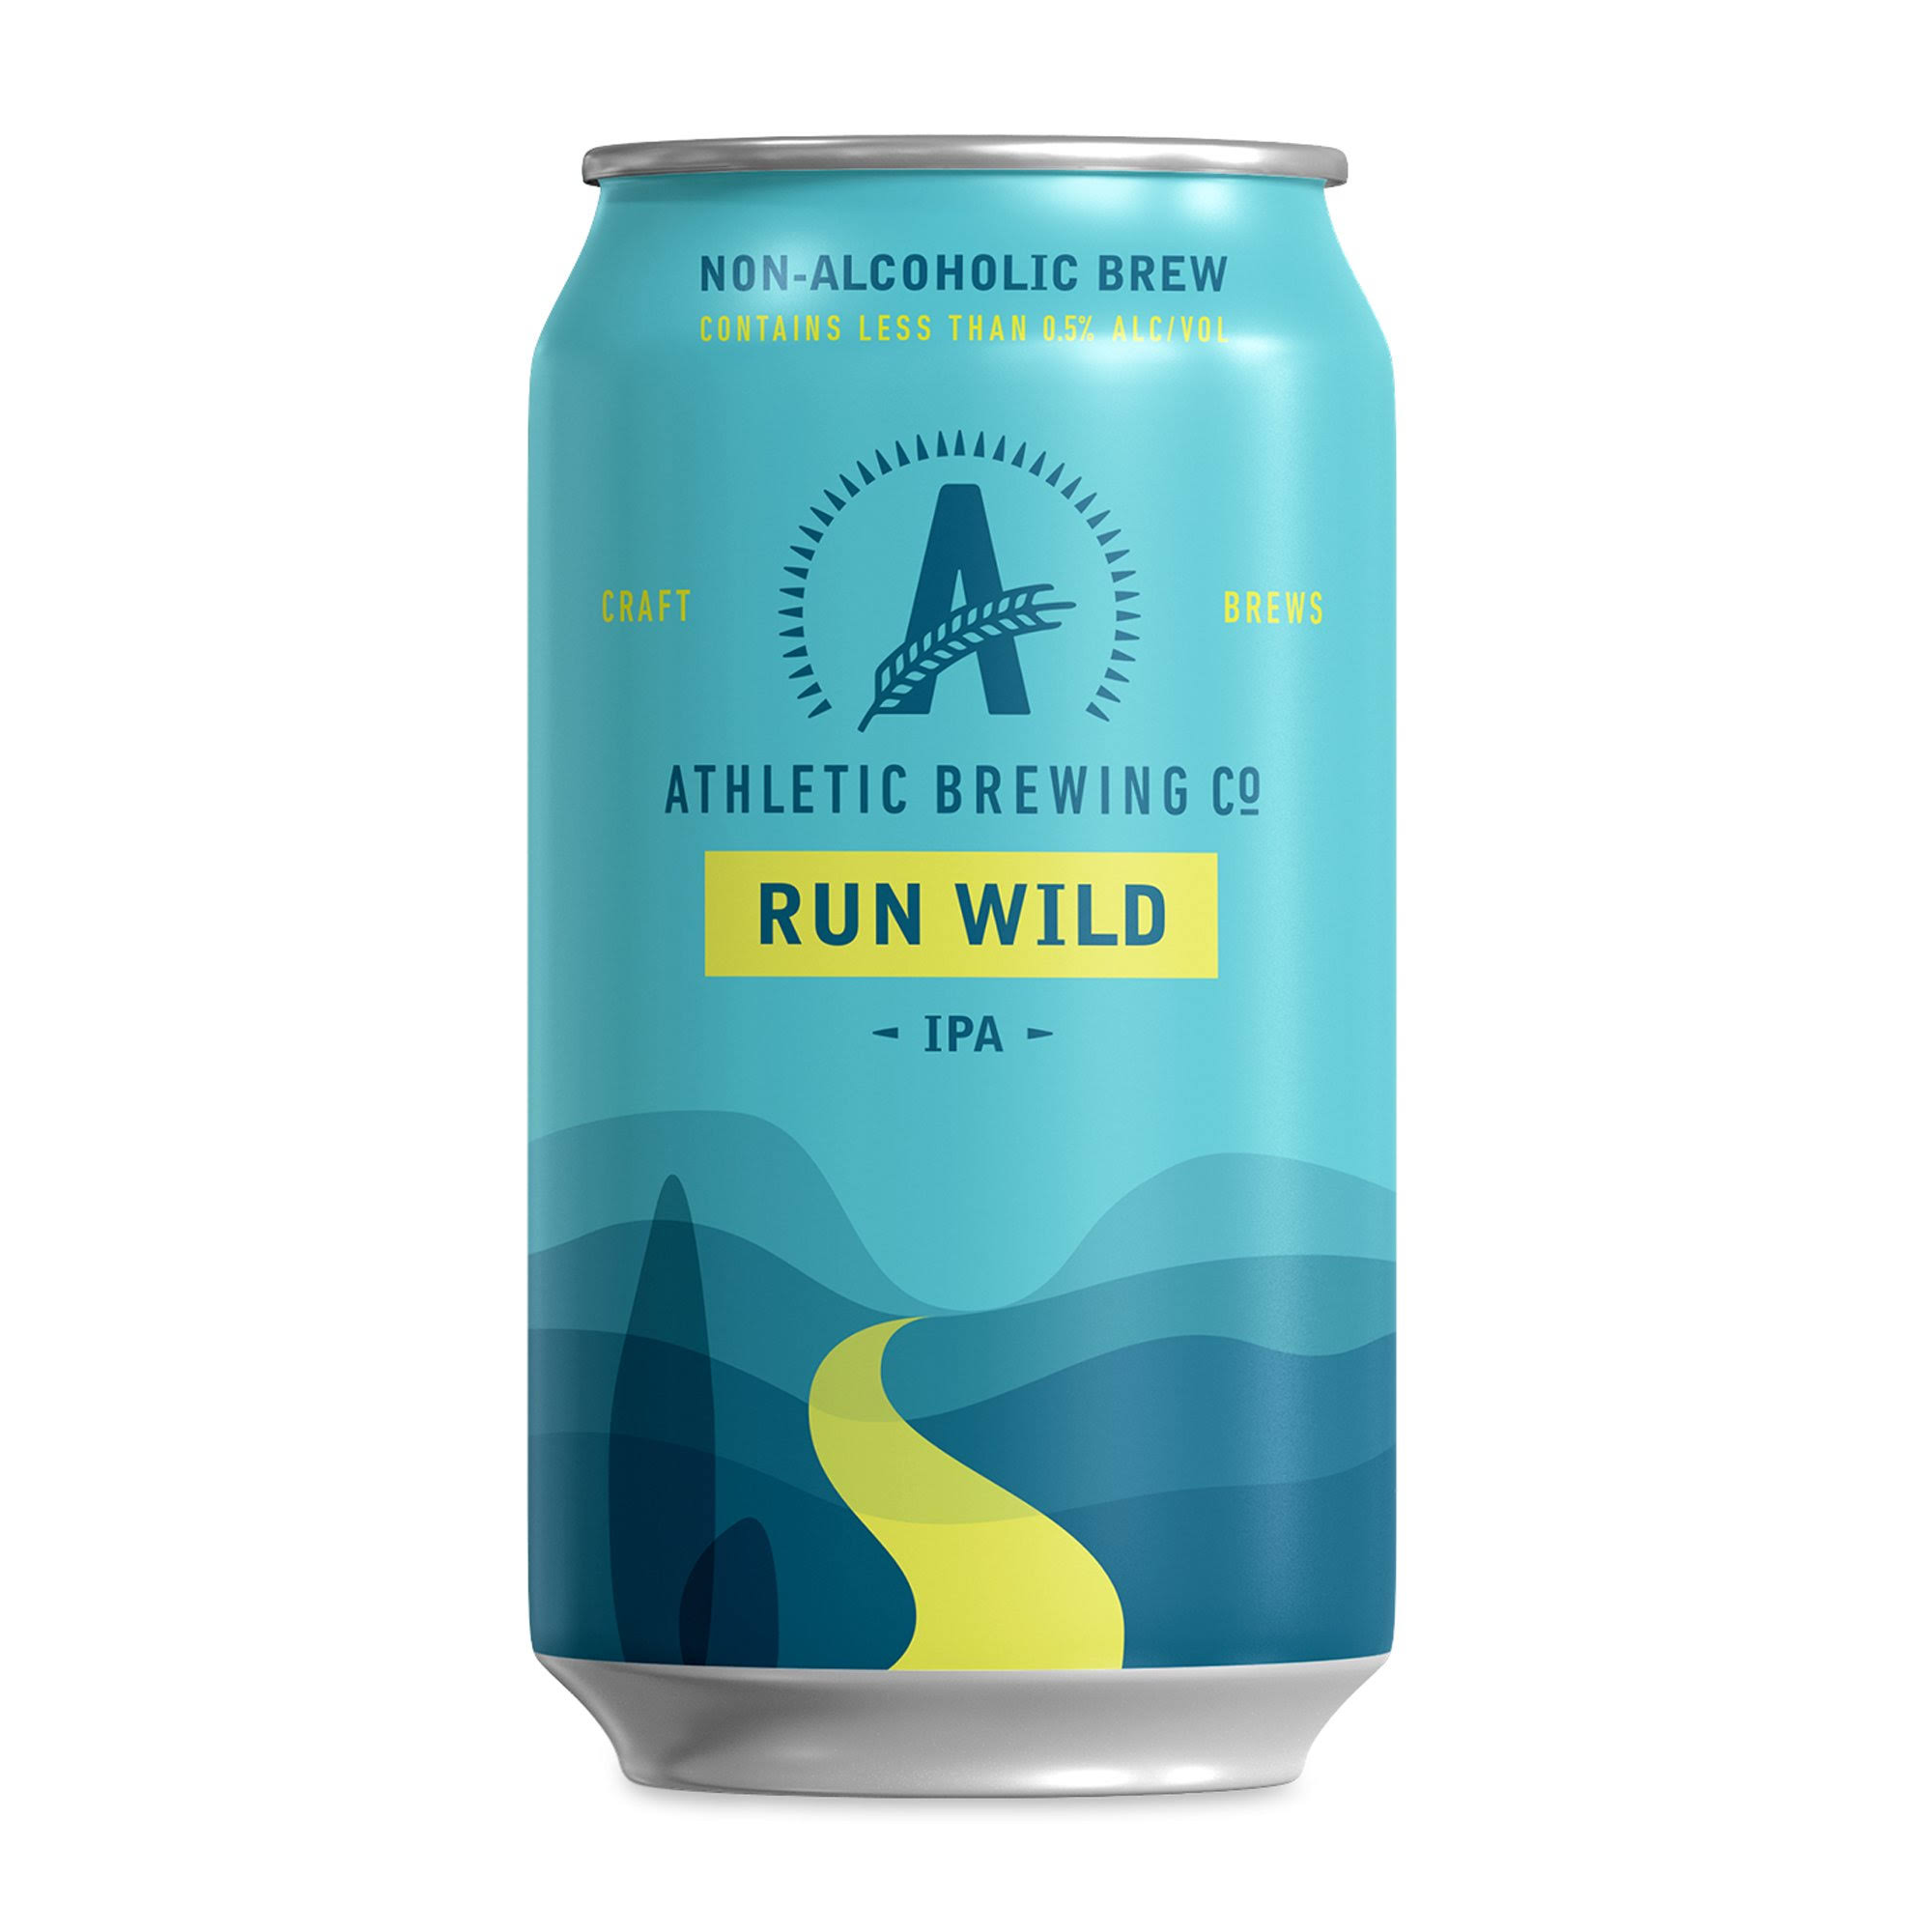 Run Wild IPA | Athletic Brewing Co. | The Drinks Edit 6 Cans